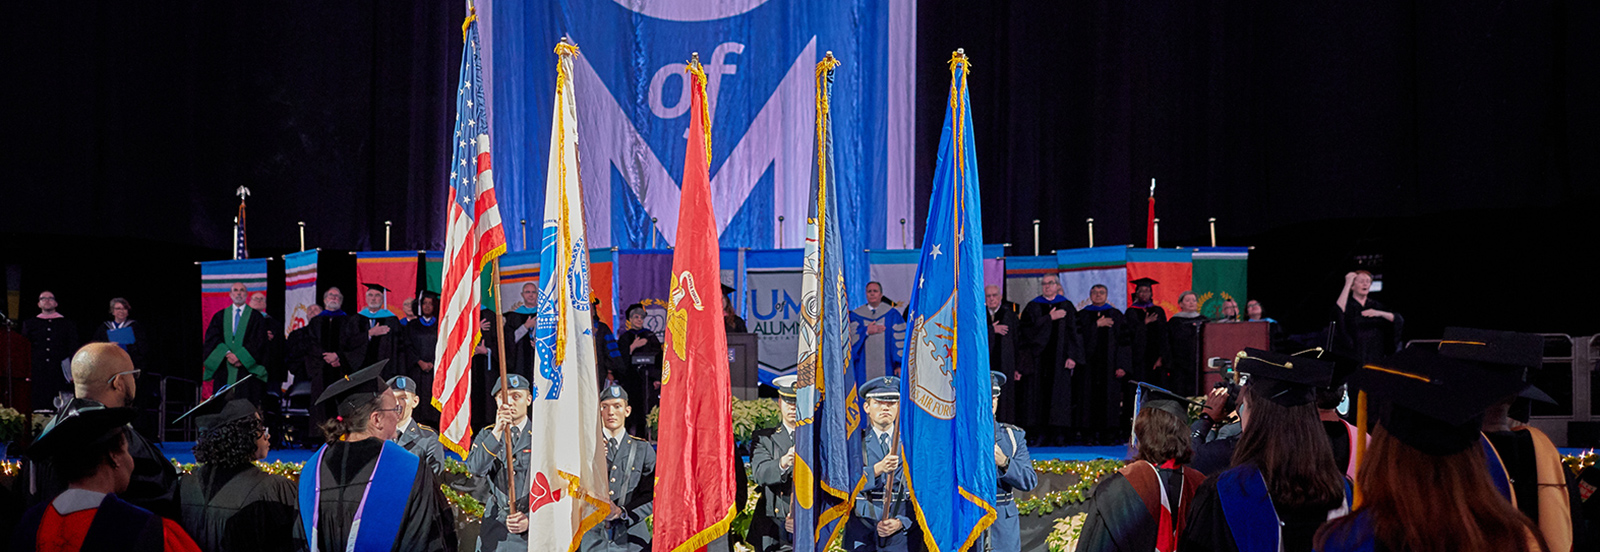 Presenting the Colors at Commencement